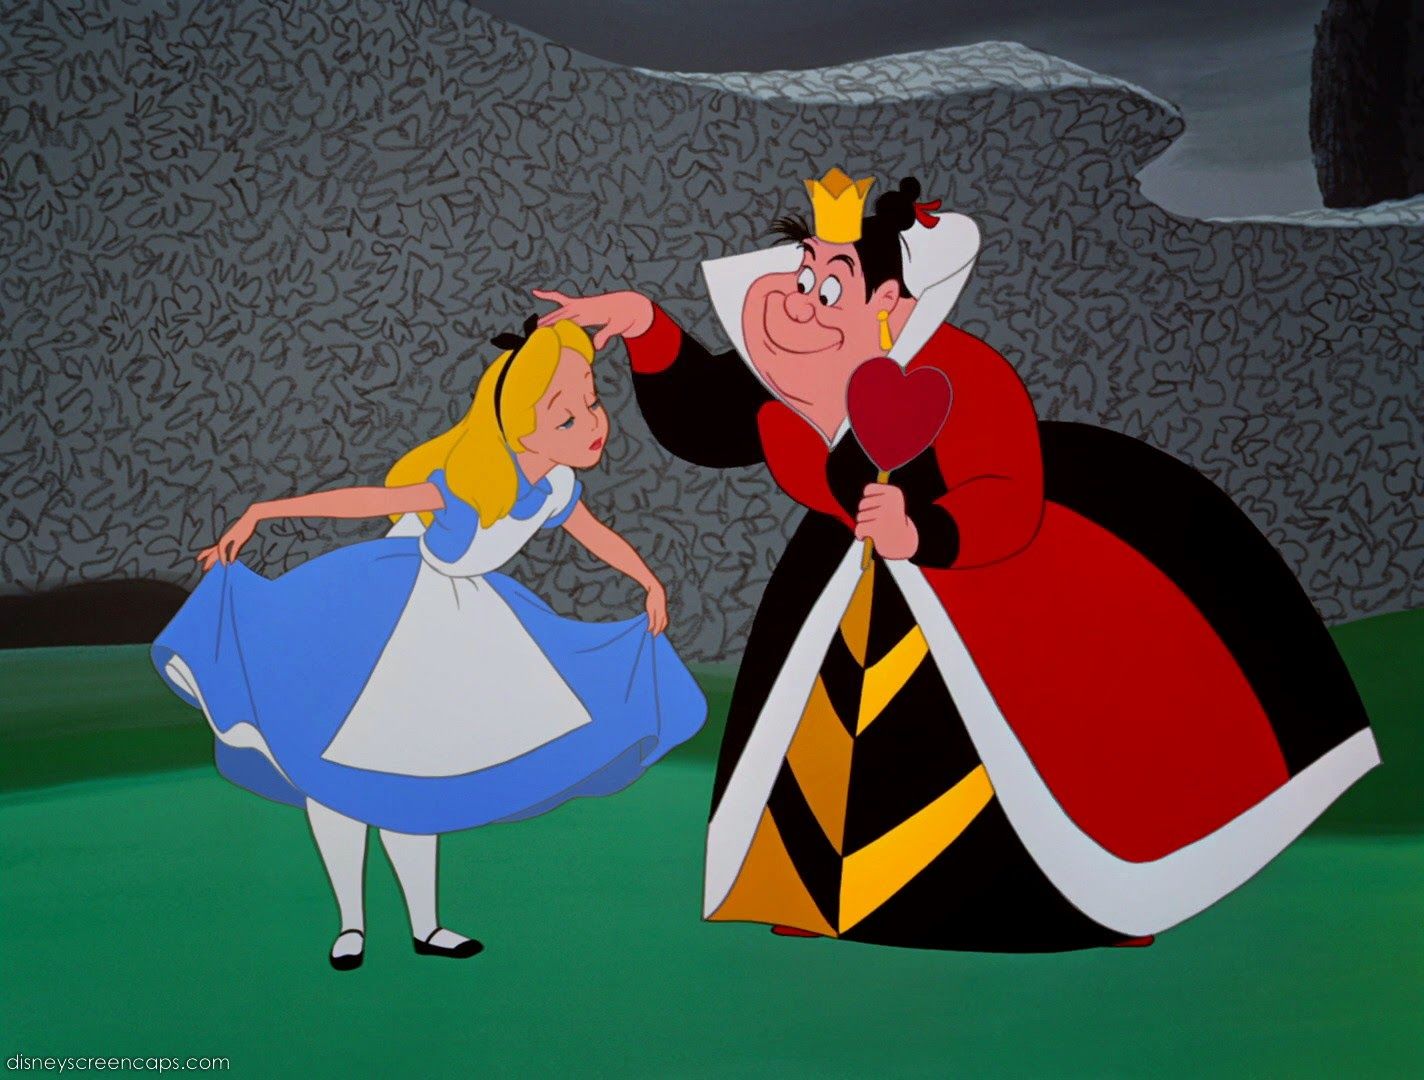 Disney 25 Secrets About Alice In Wonderland That Make Us Fall Down The Rabbit Hole